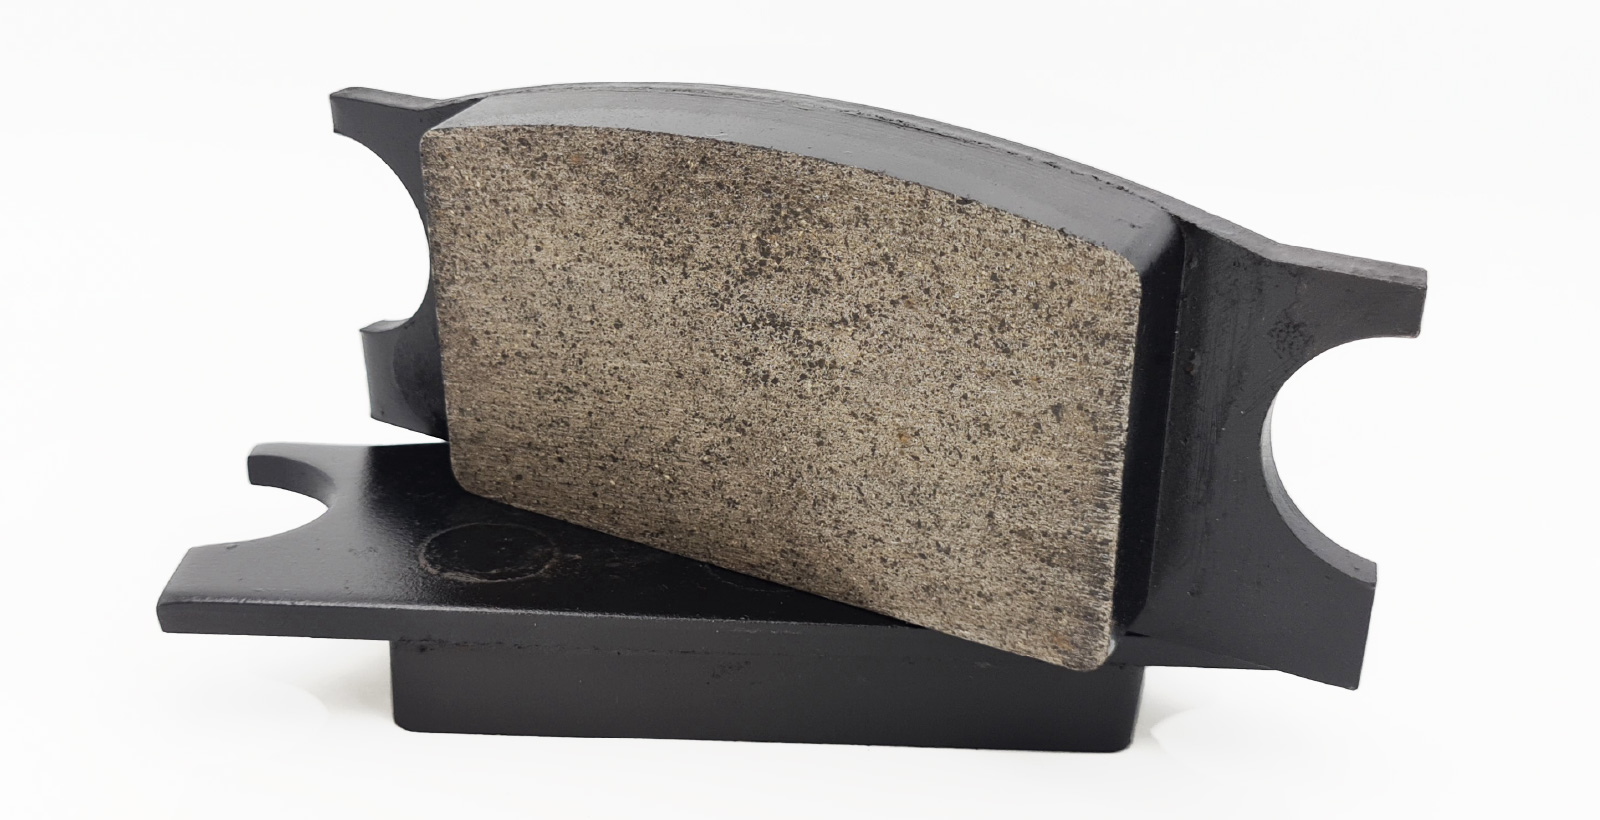 Off Highway Brake Pads for Agricultural Industry